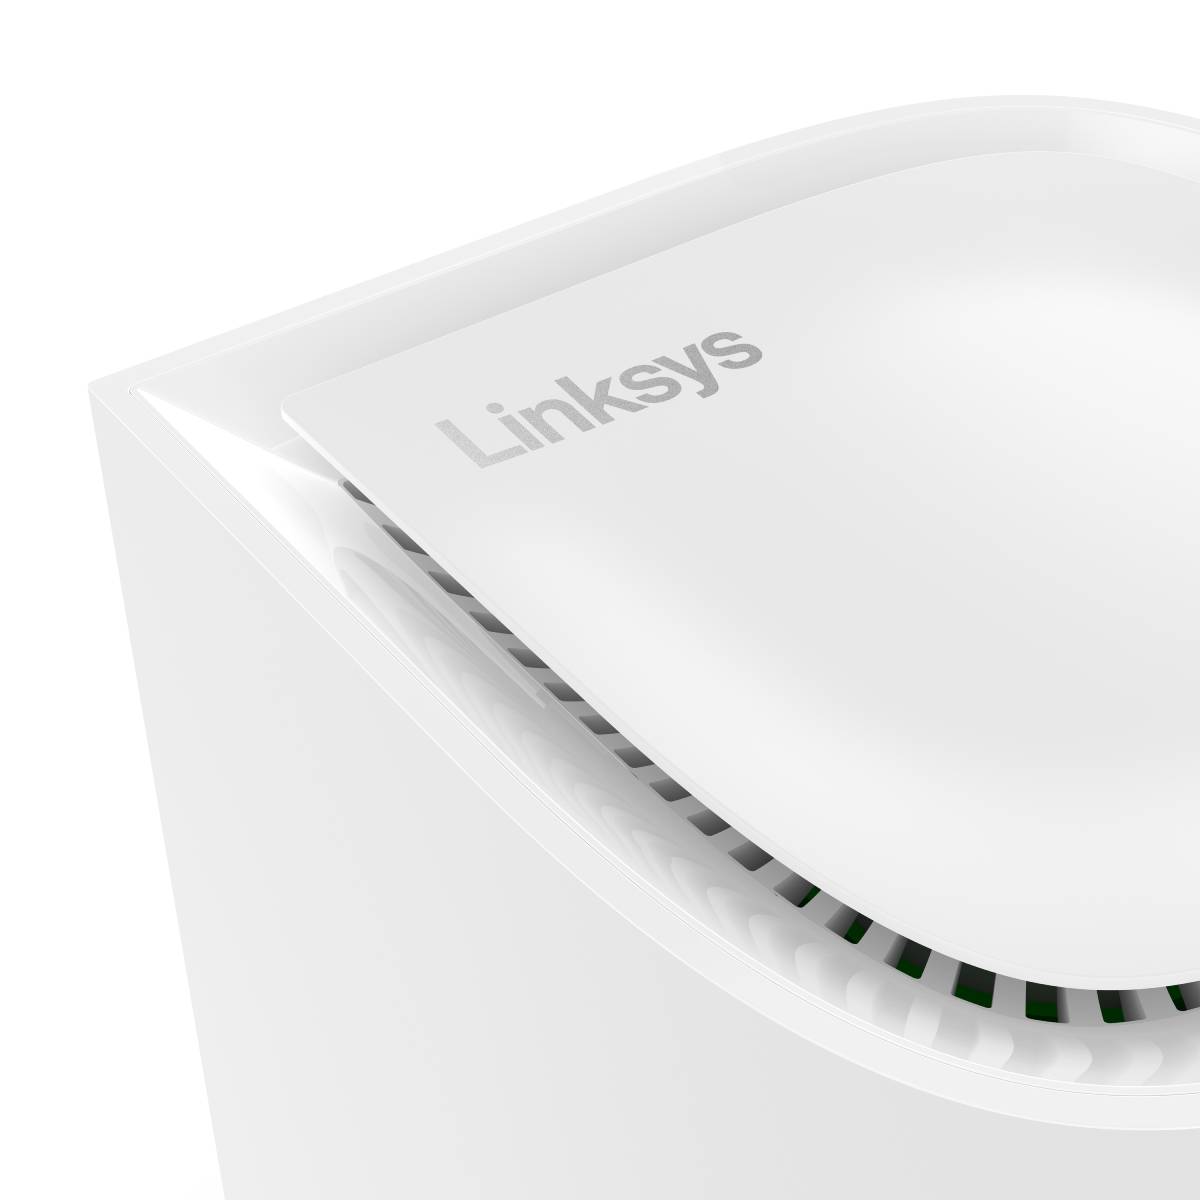 Linksys Velop Pro 7 Tri-Band BE11000 Cognitive Mesh WiFi 7 Router (MBE7001) (1-Pack), , large image number 3